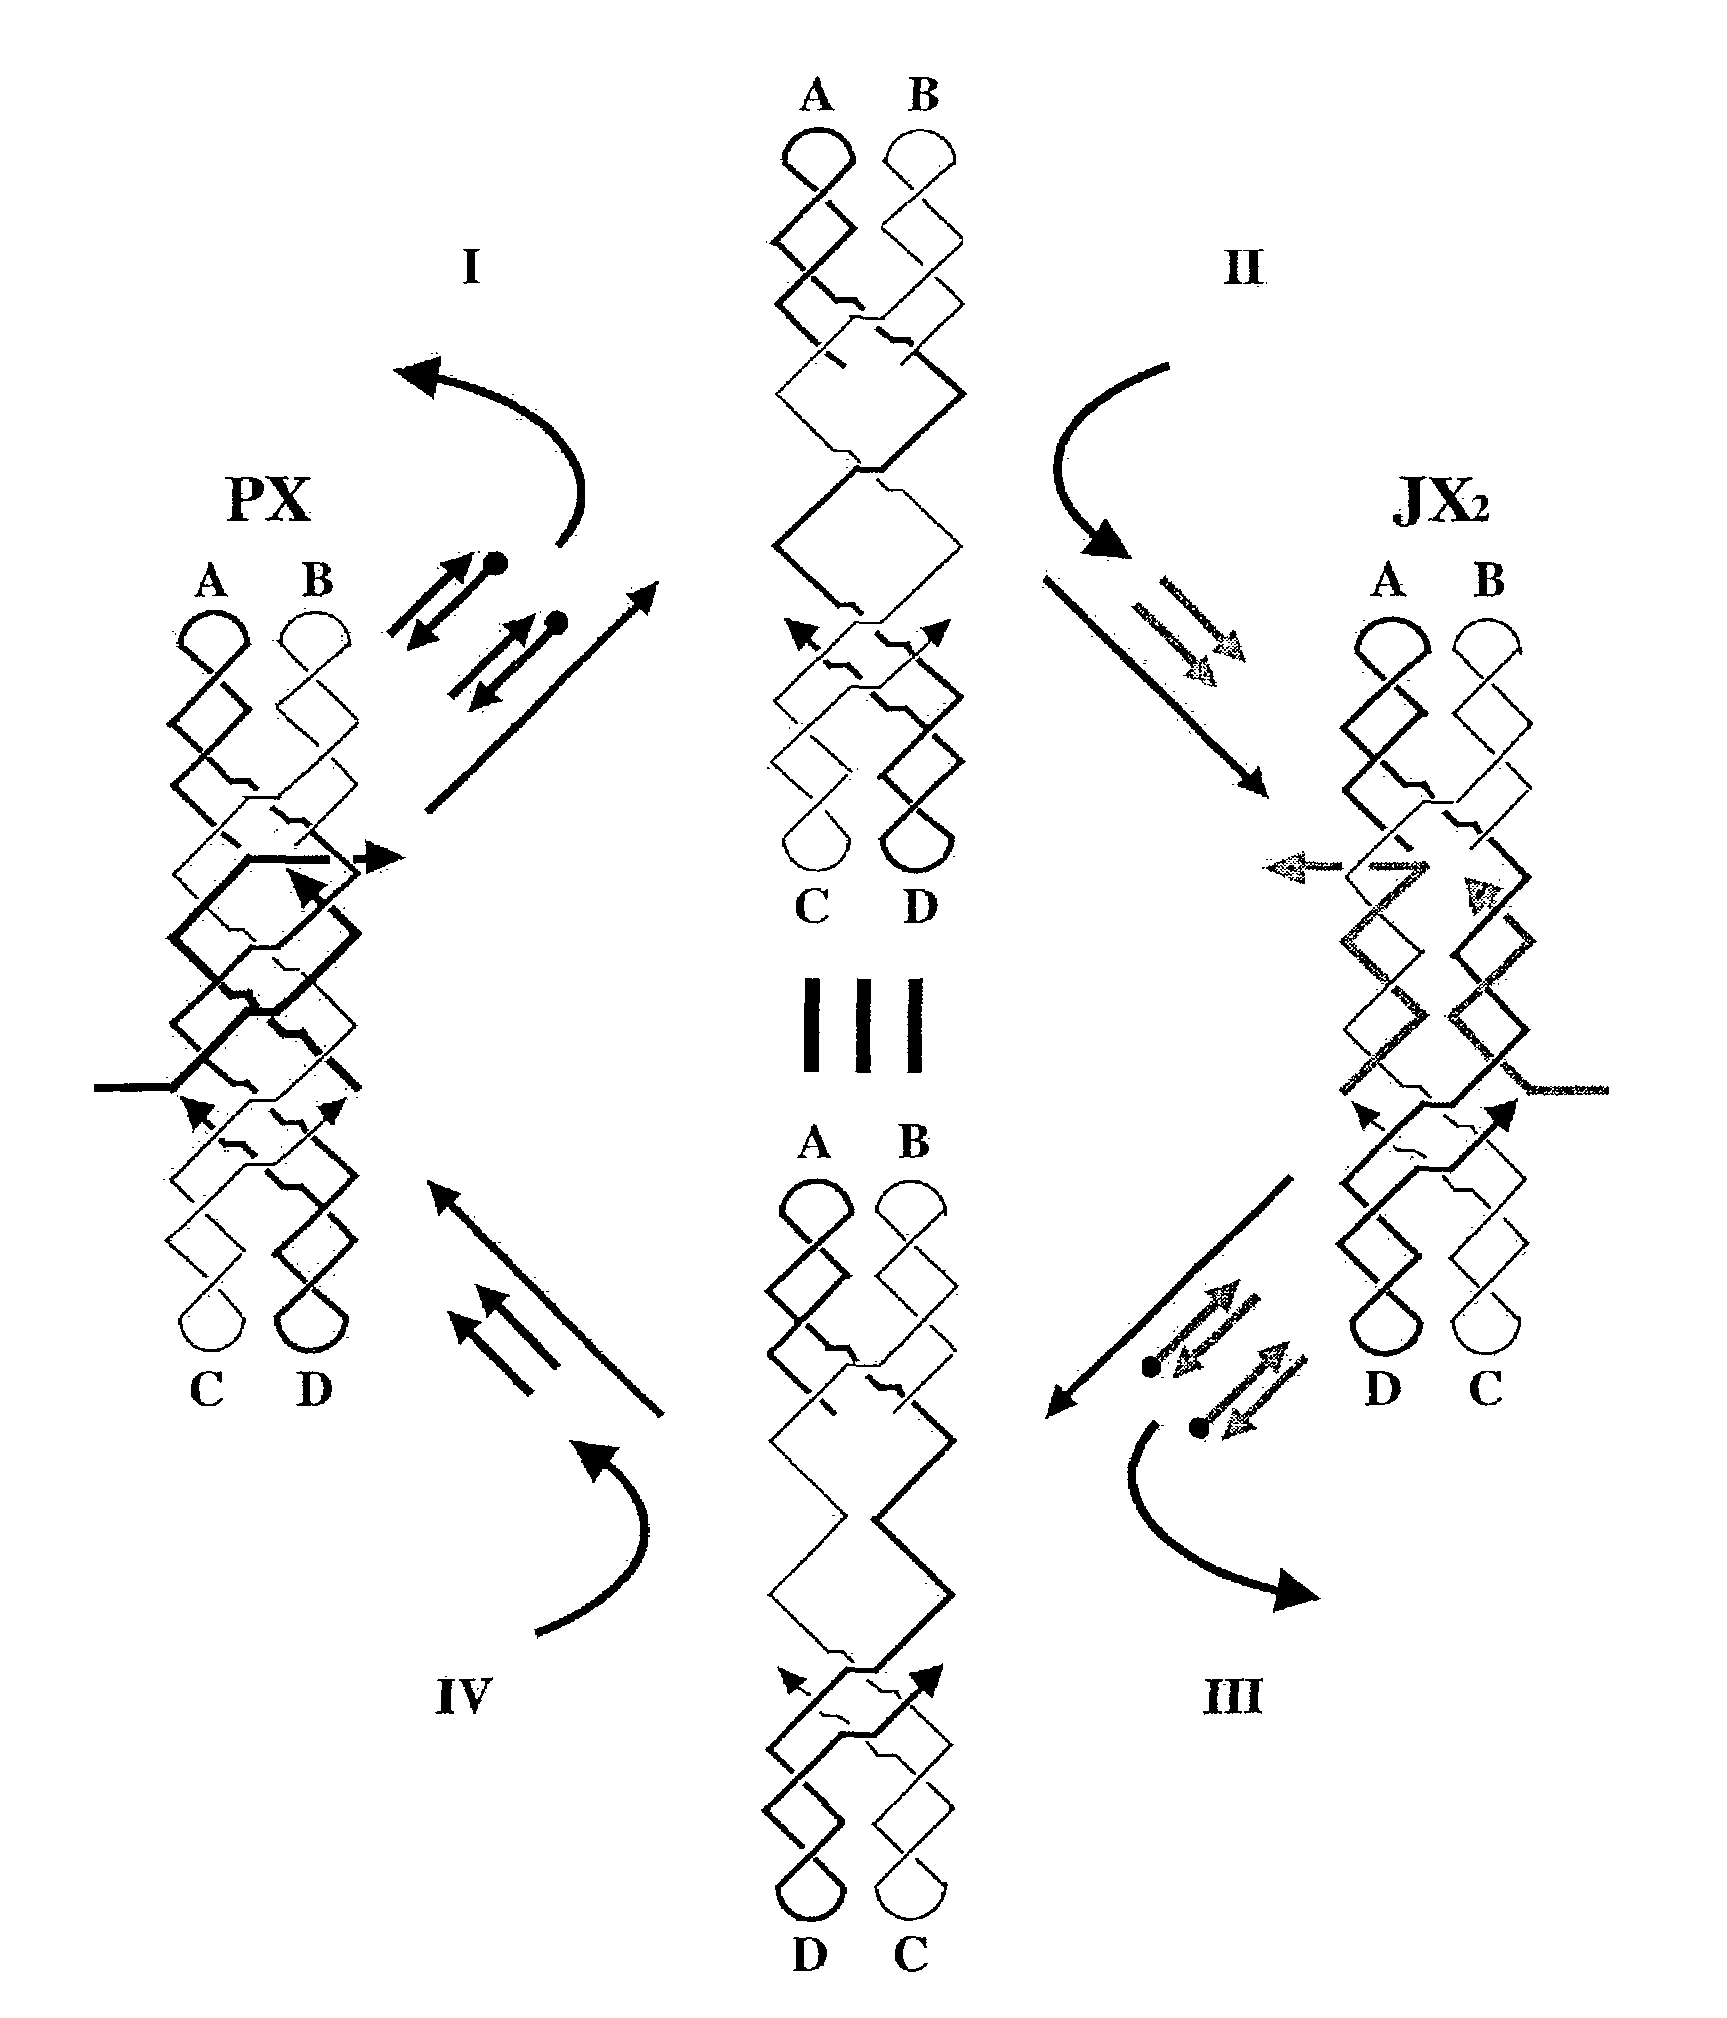 Polynucleic acid nanomechanical device controlled by hybridization topology